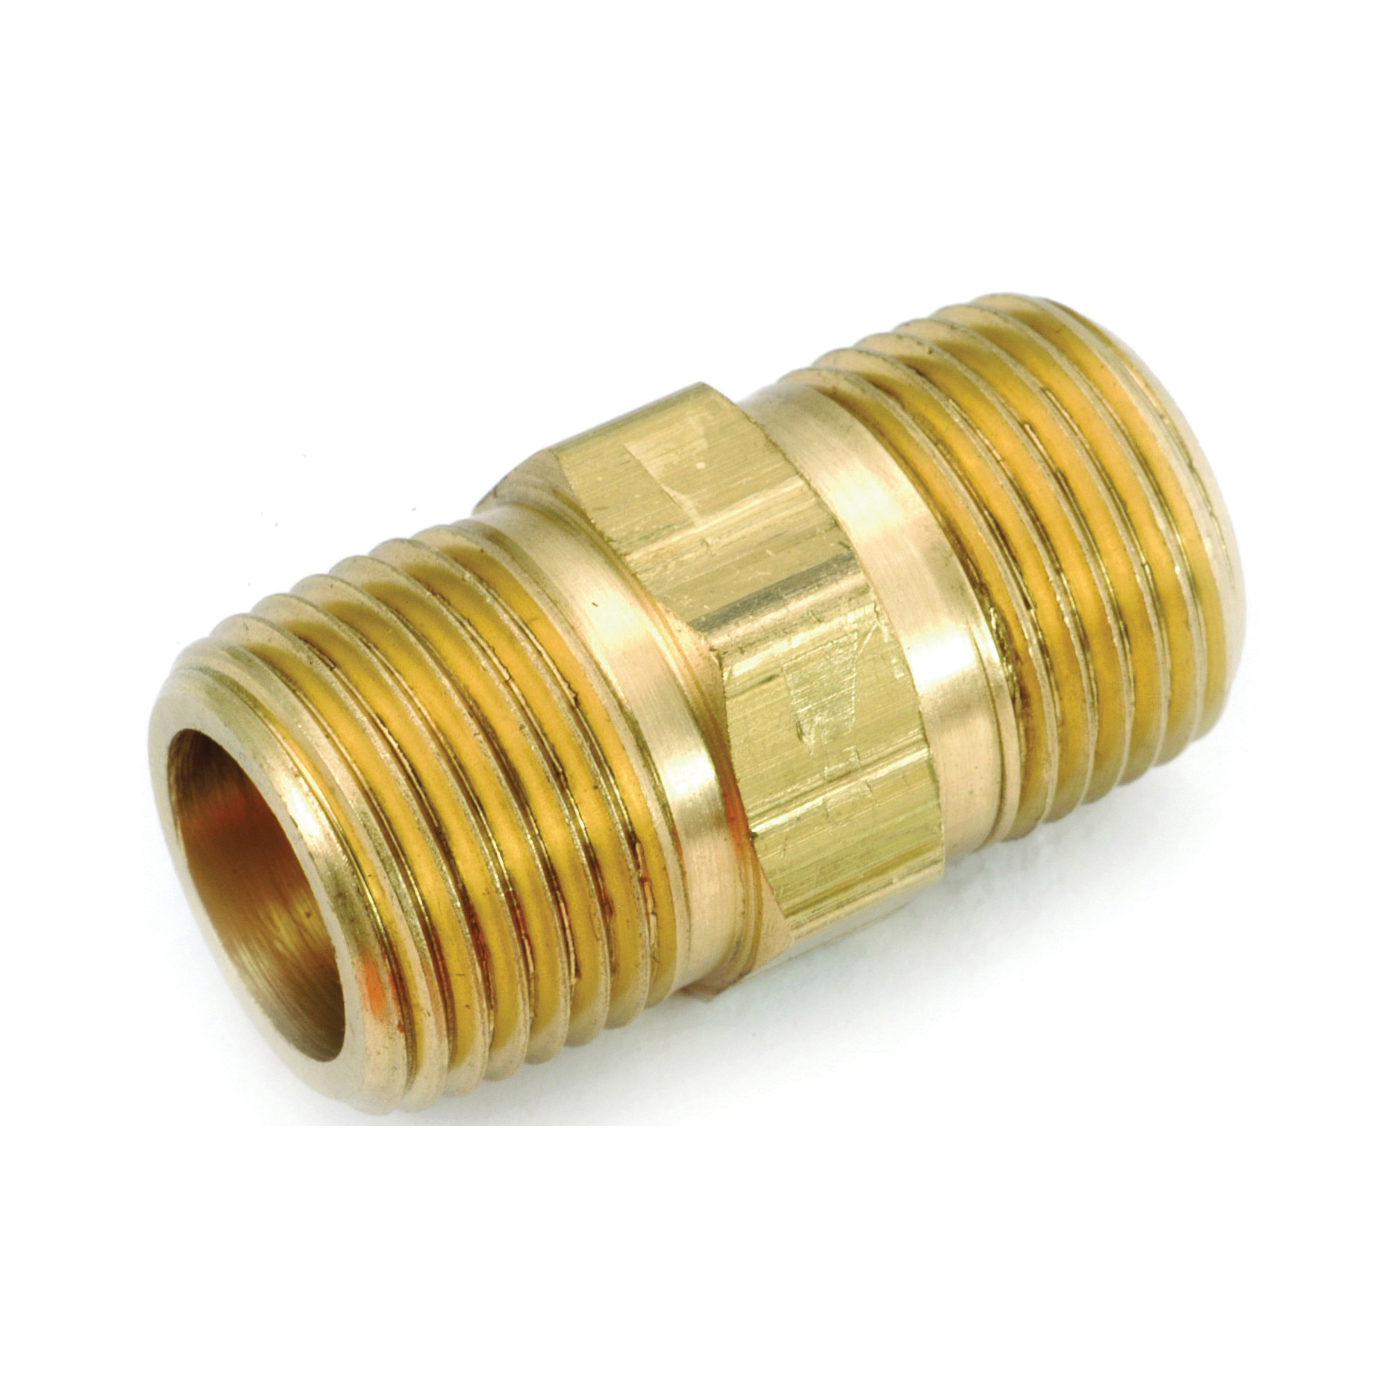 Anderson Metals 756122-04 Pipe Nipple, 1/4 in, MPT, Brass, 1 in L - 1